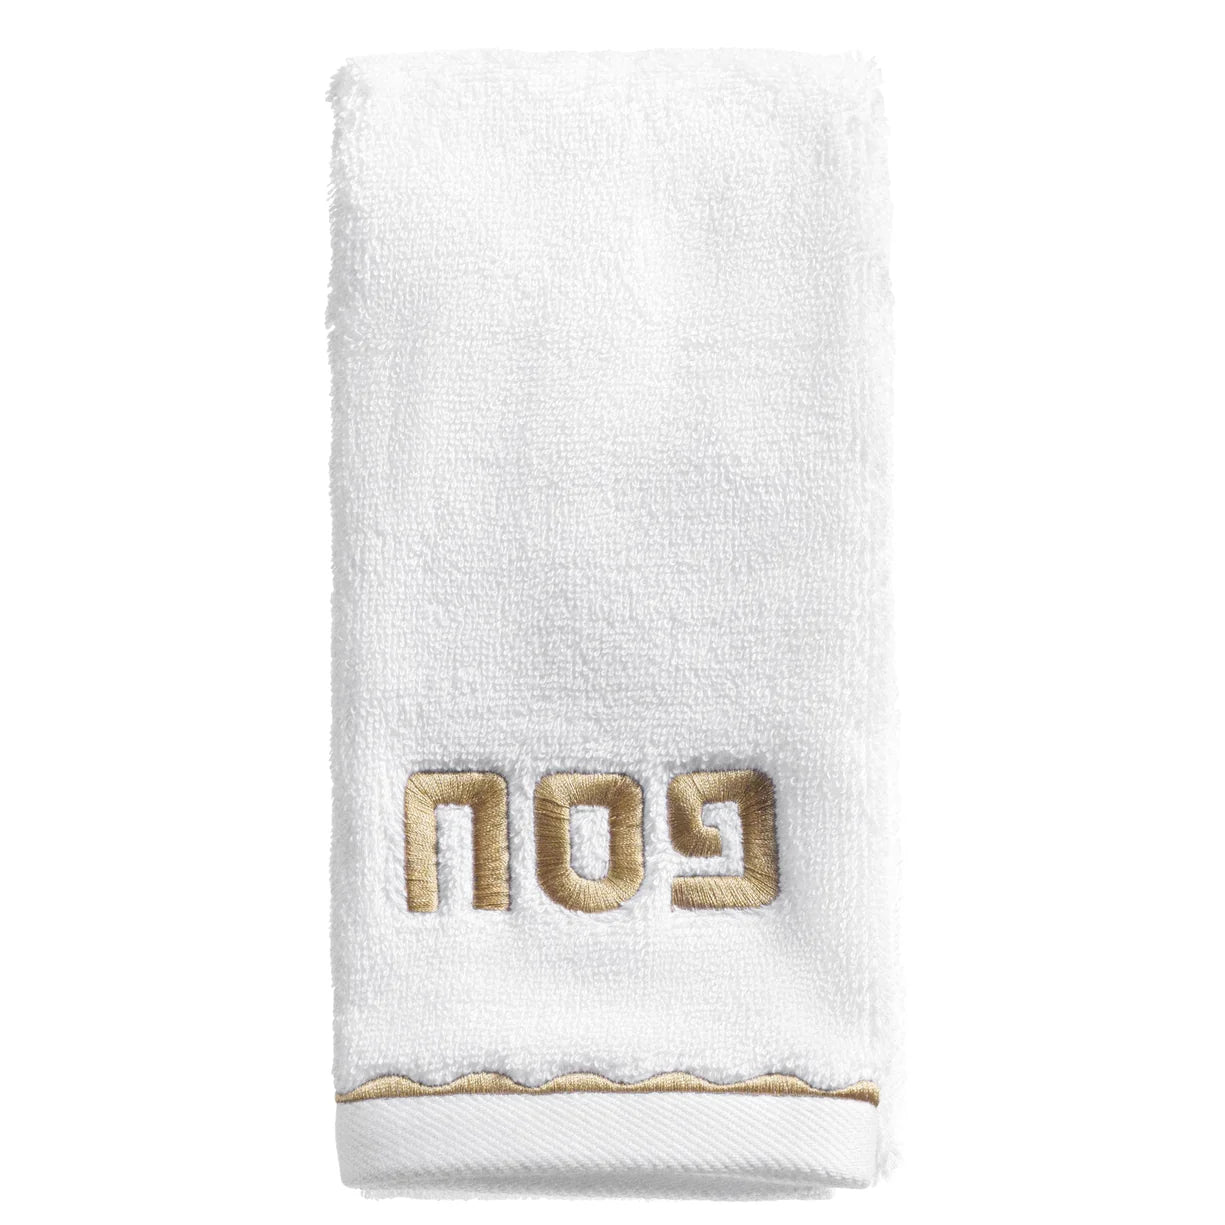 PESACH SCALLOPED HAND TOWEL - GOLD